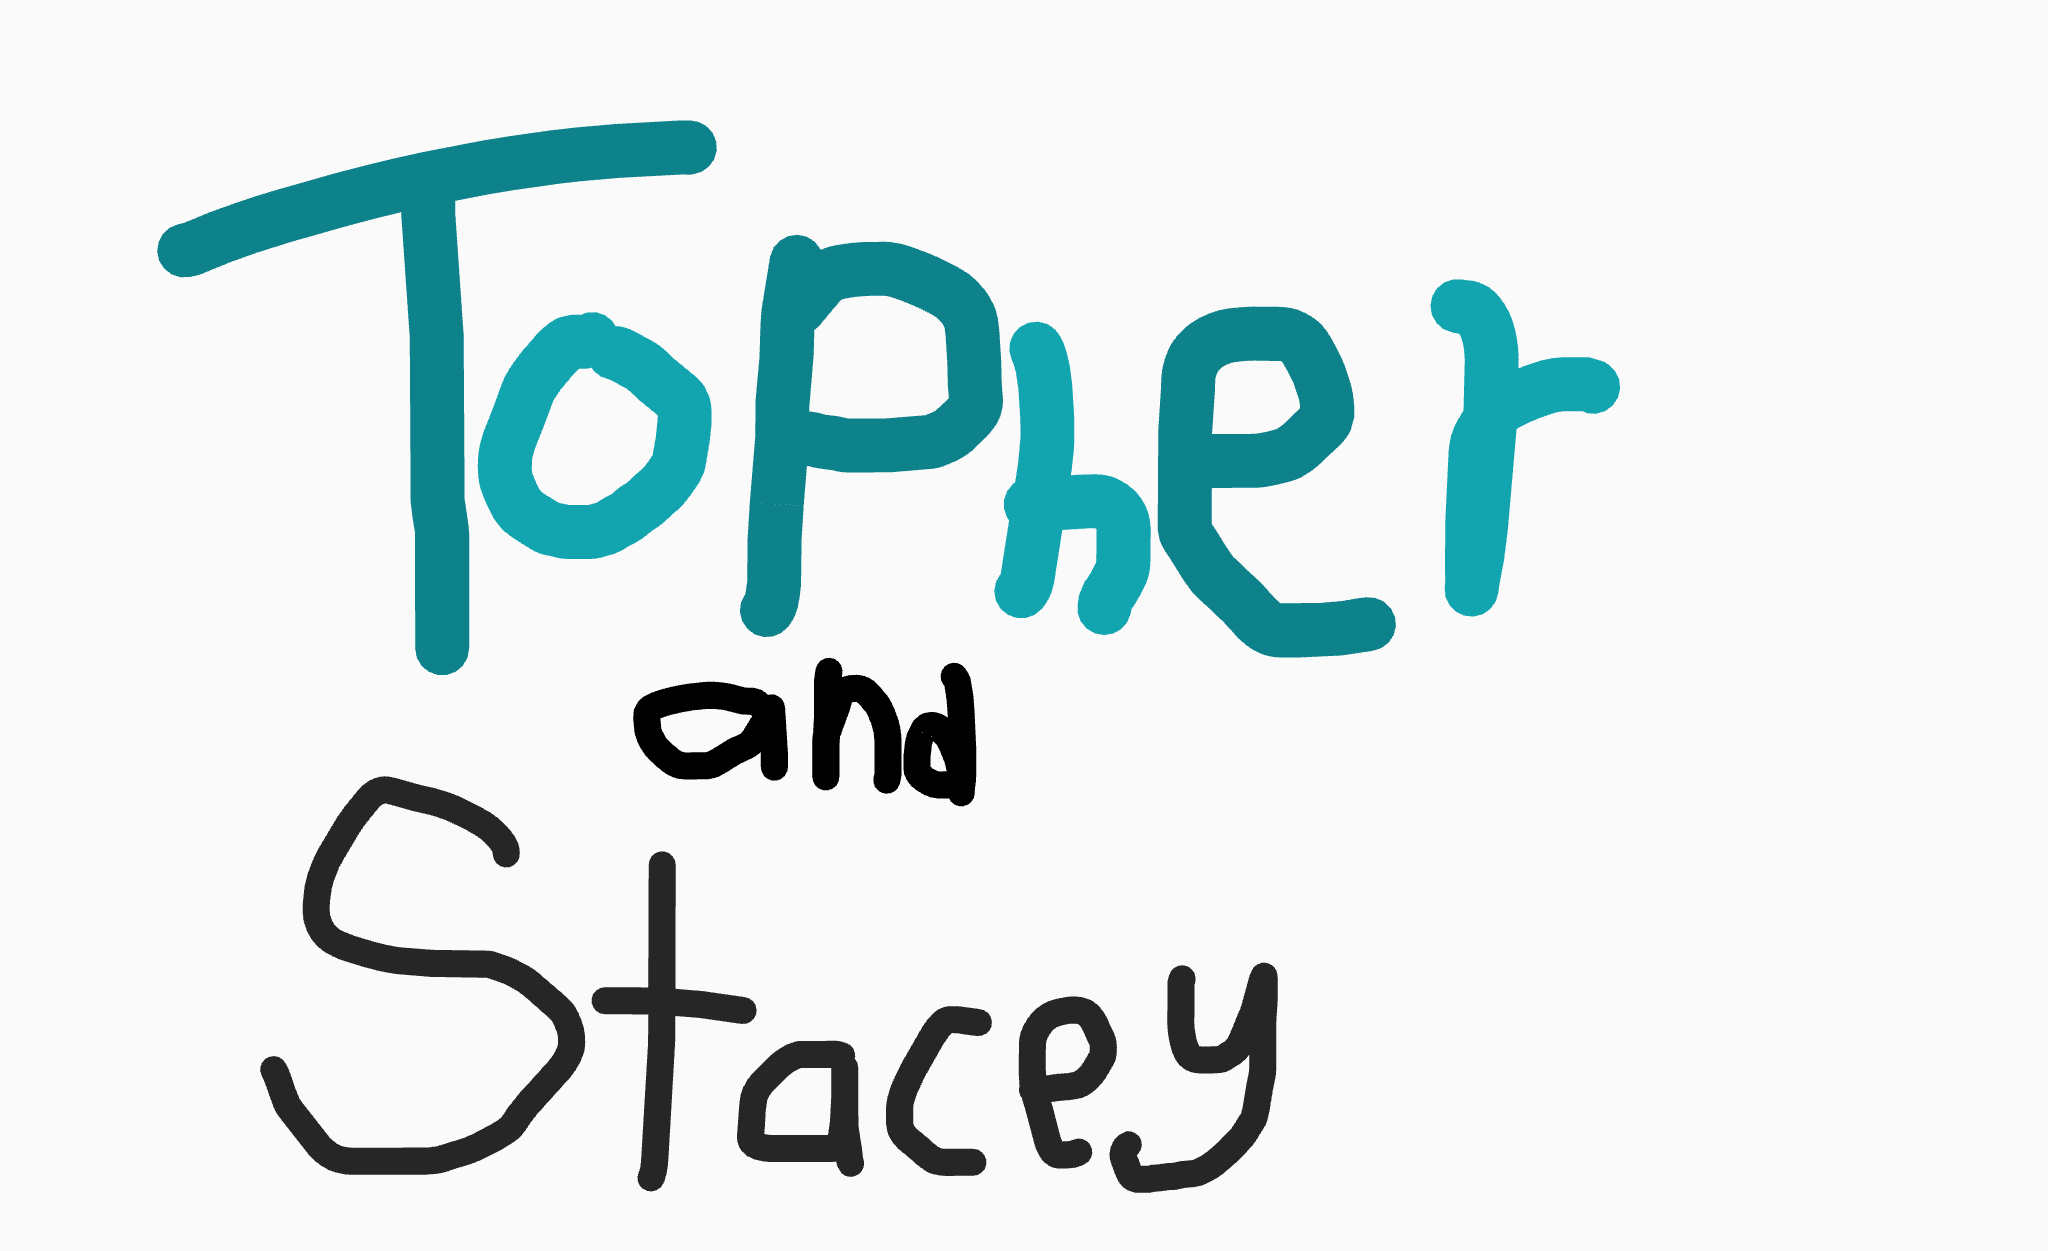 https://static.wikia.nocookie.net/treehousetv/images/f/f9/Topher_and_Stacey_logo.png/revision/latest?cb=20220705203108